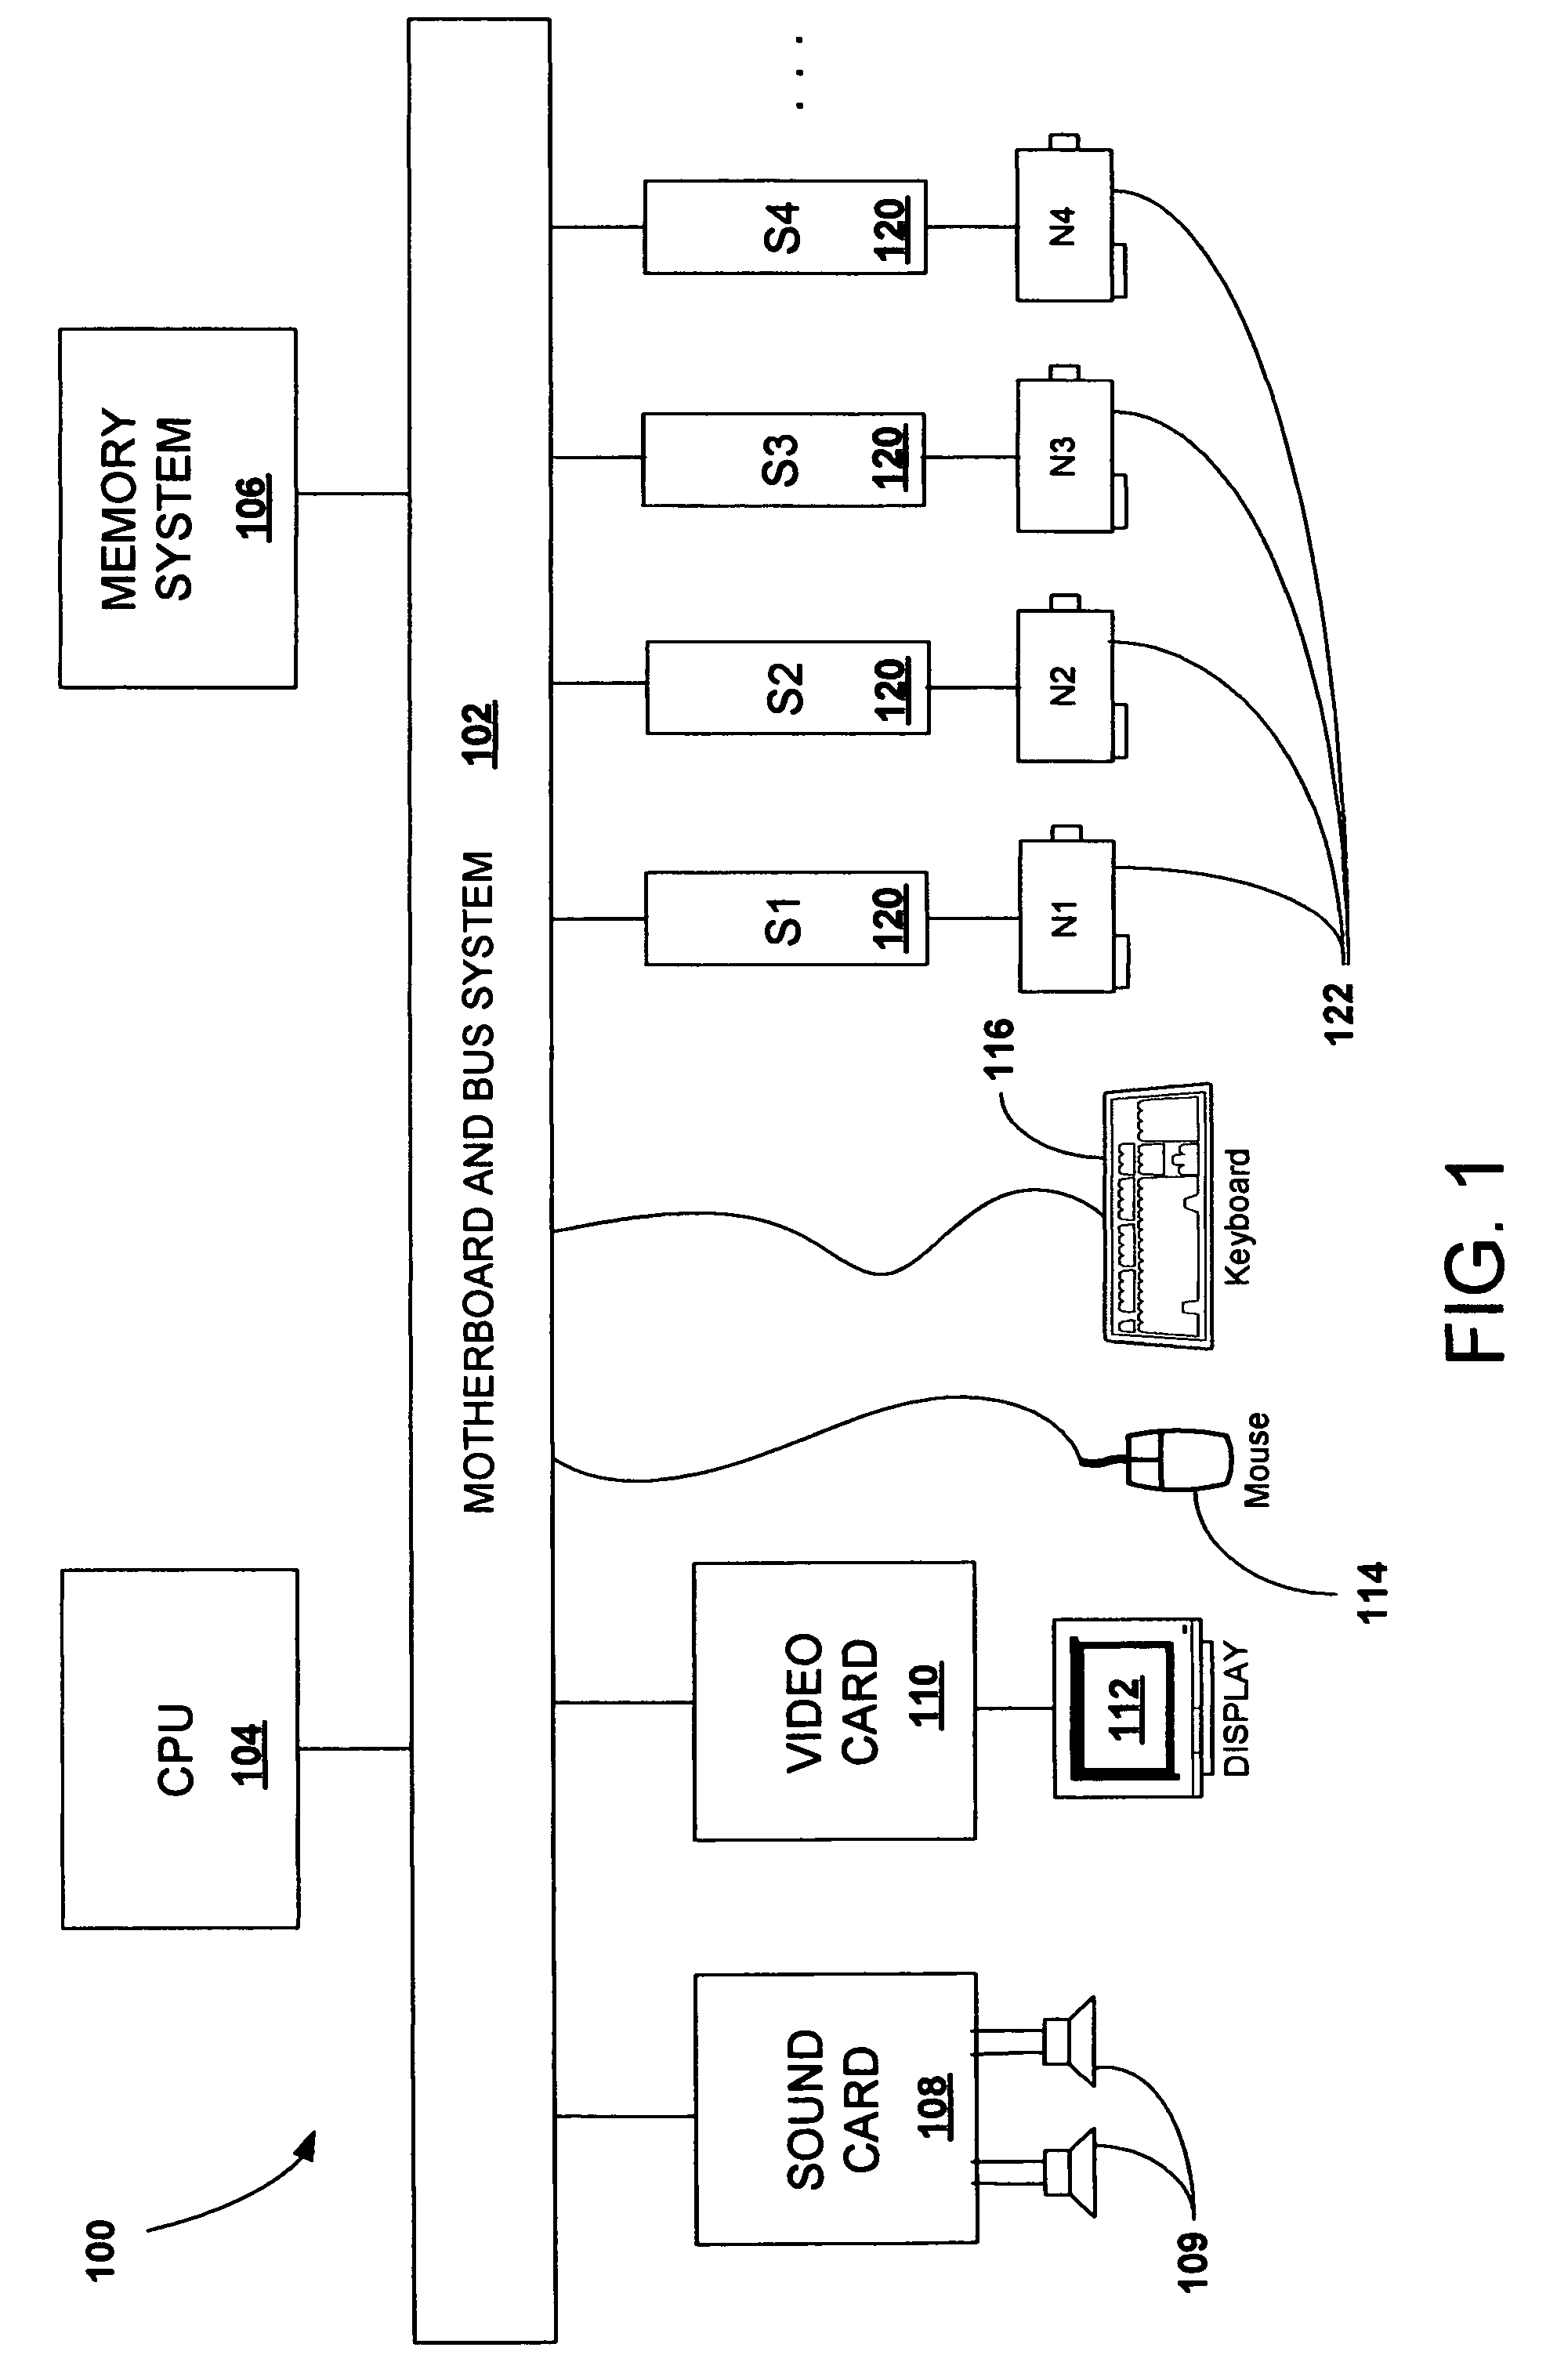 Aggregation over multiple processing nodes of network resources each providing offloaded connections between applications over a network